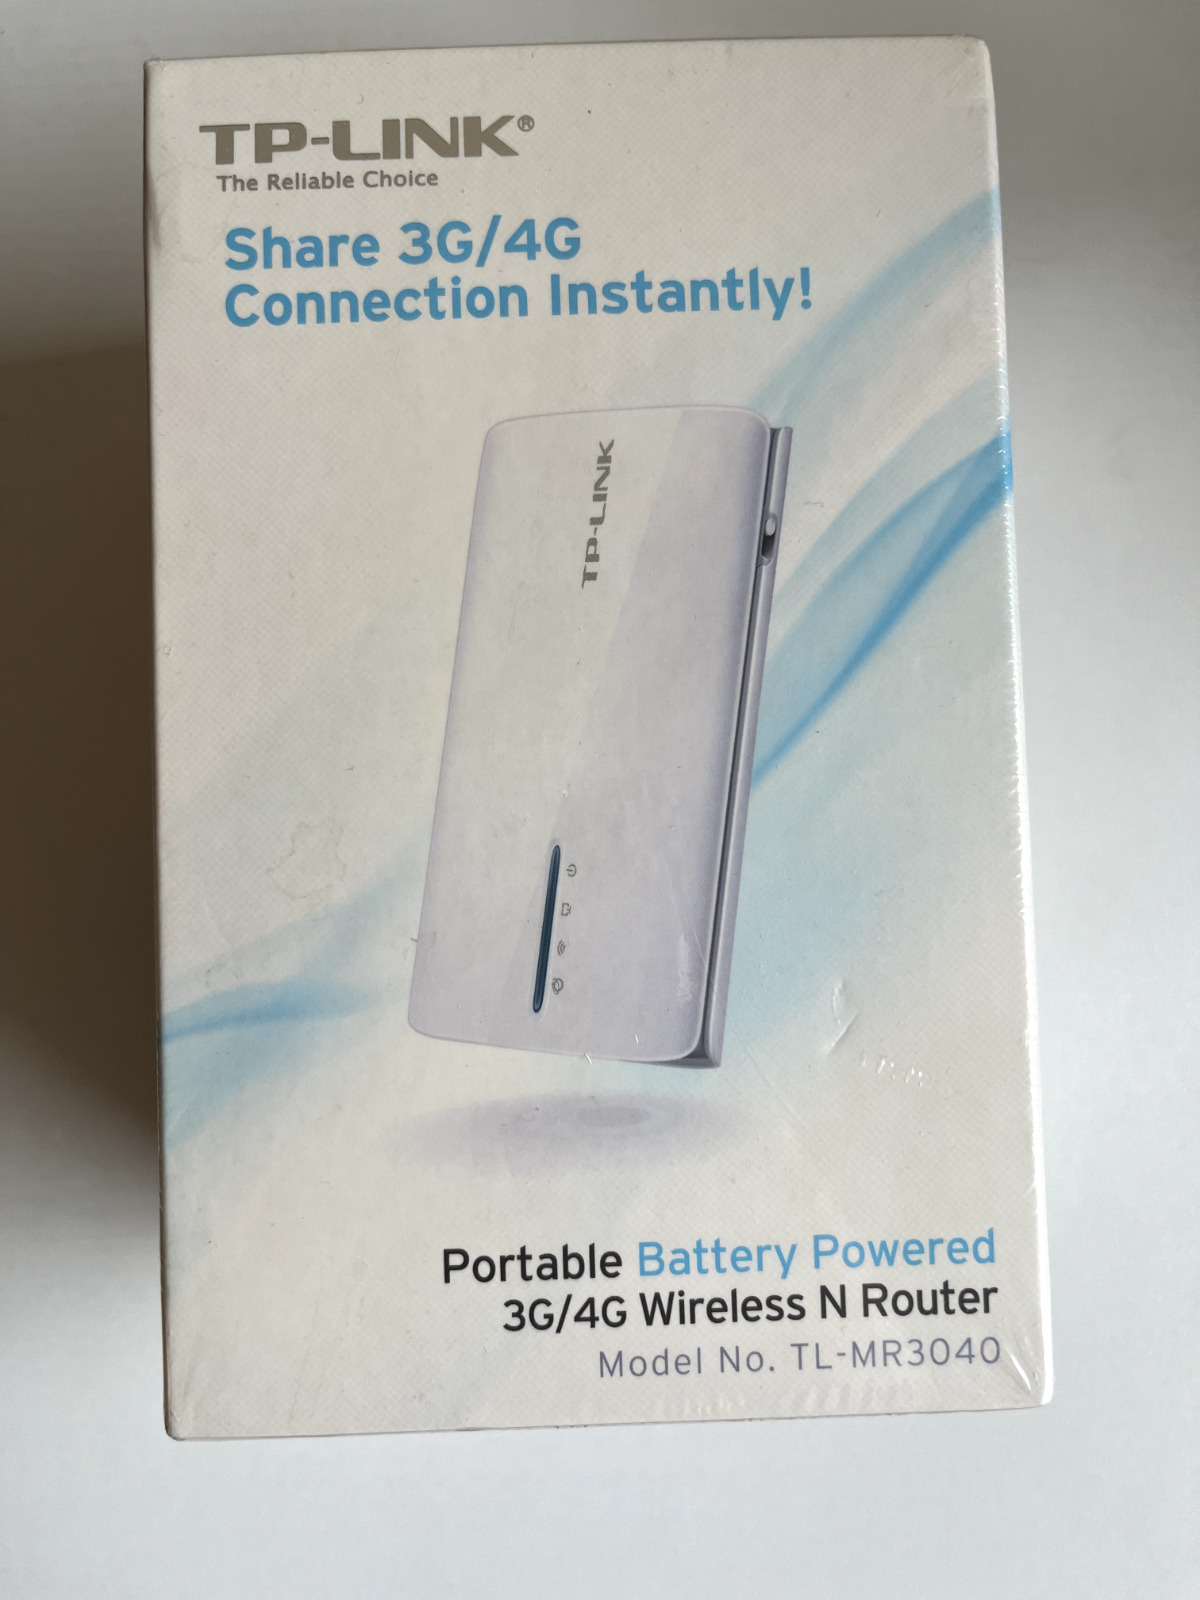 BNIB SEALED TP-LINK Portable Battery Powered 3G/4G Wireless N Router TL-MR3040